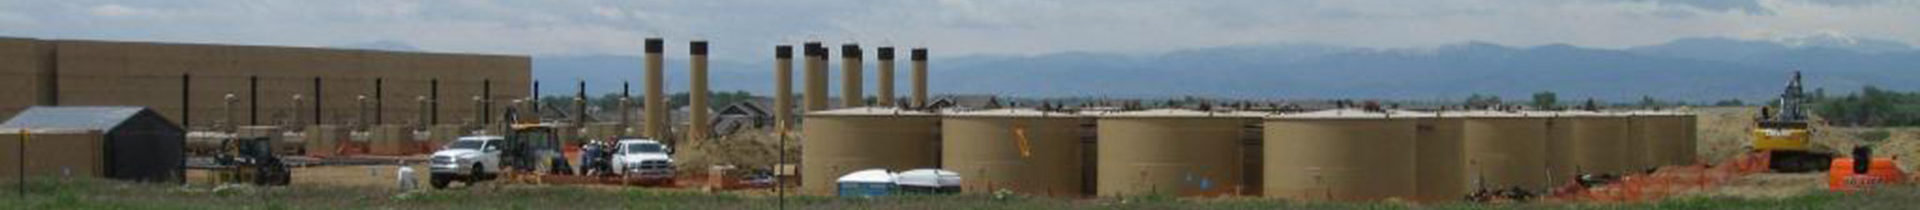 View of large oil and gas development facility with mountains in background